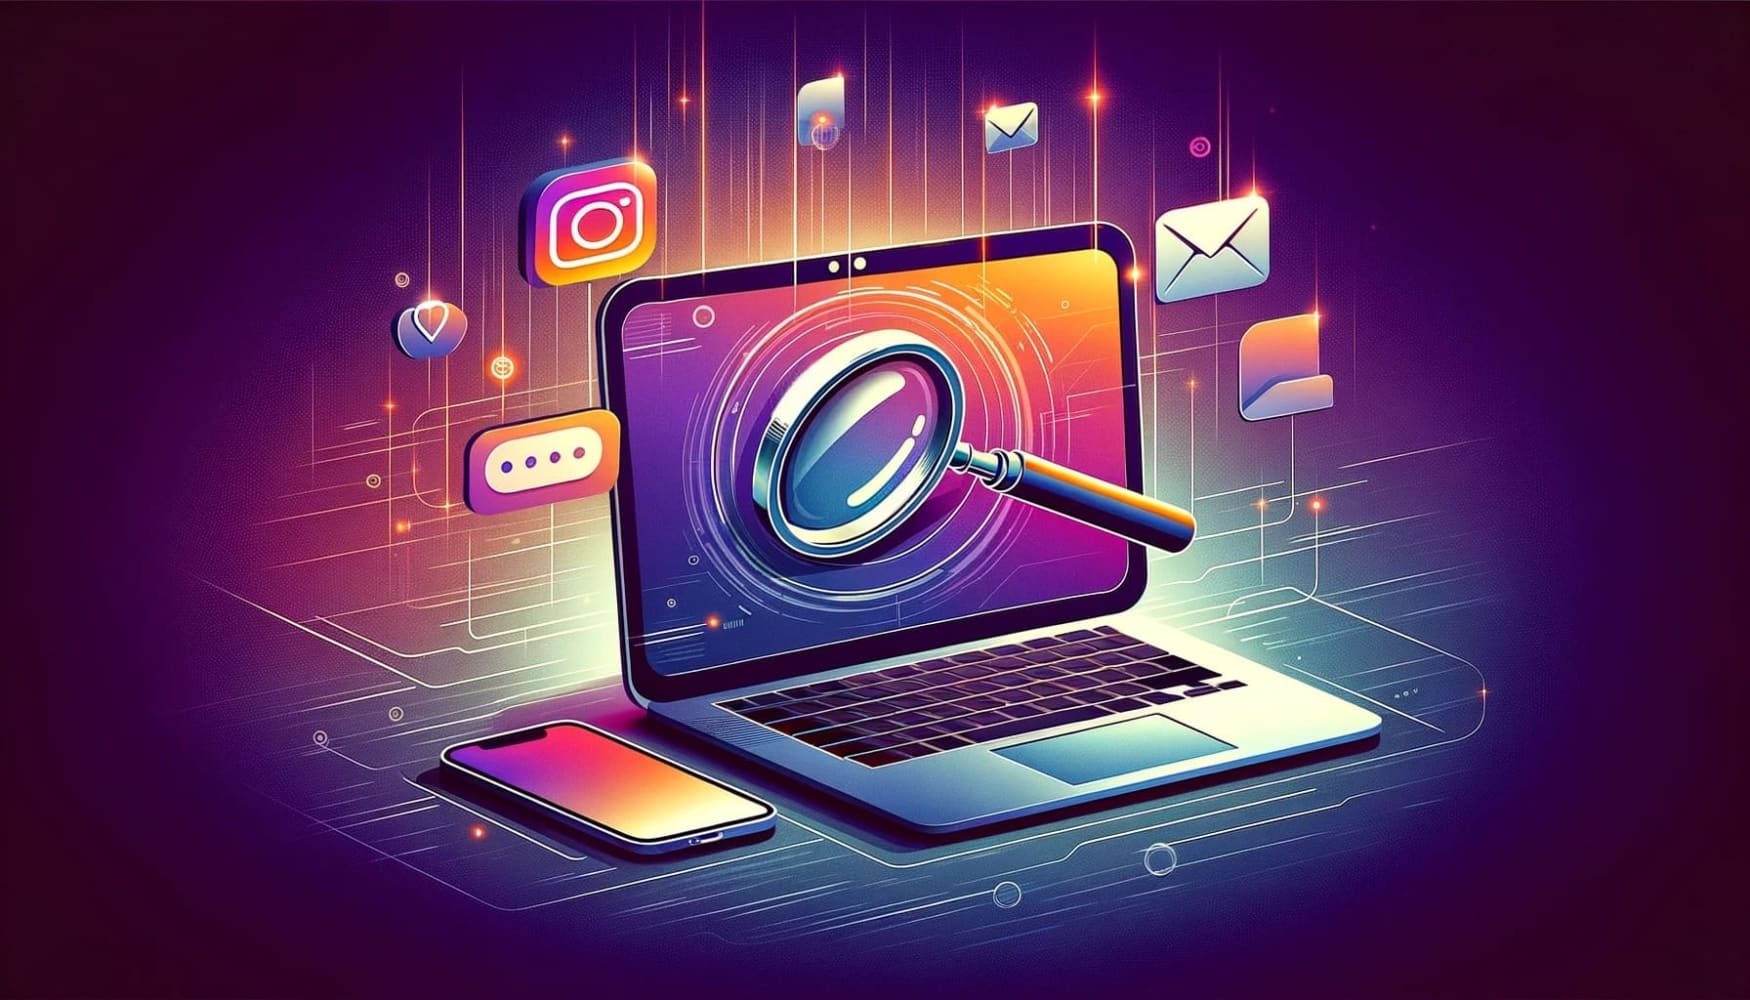 A modern, digital-themed illustration representing the concept of finding someone on Instagram. The image features a laptop with a magnifying glass symbol hovering above it, symbolizing search and discovery. There are various icons around the laptop, including a phone, an envelope, and a Google search icon, each representing different methods of searching: by phone number, email, and Google image search, respectively